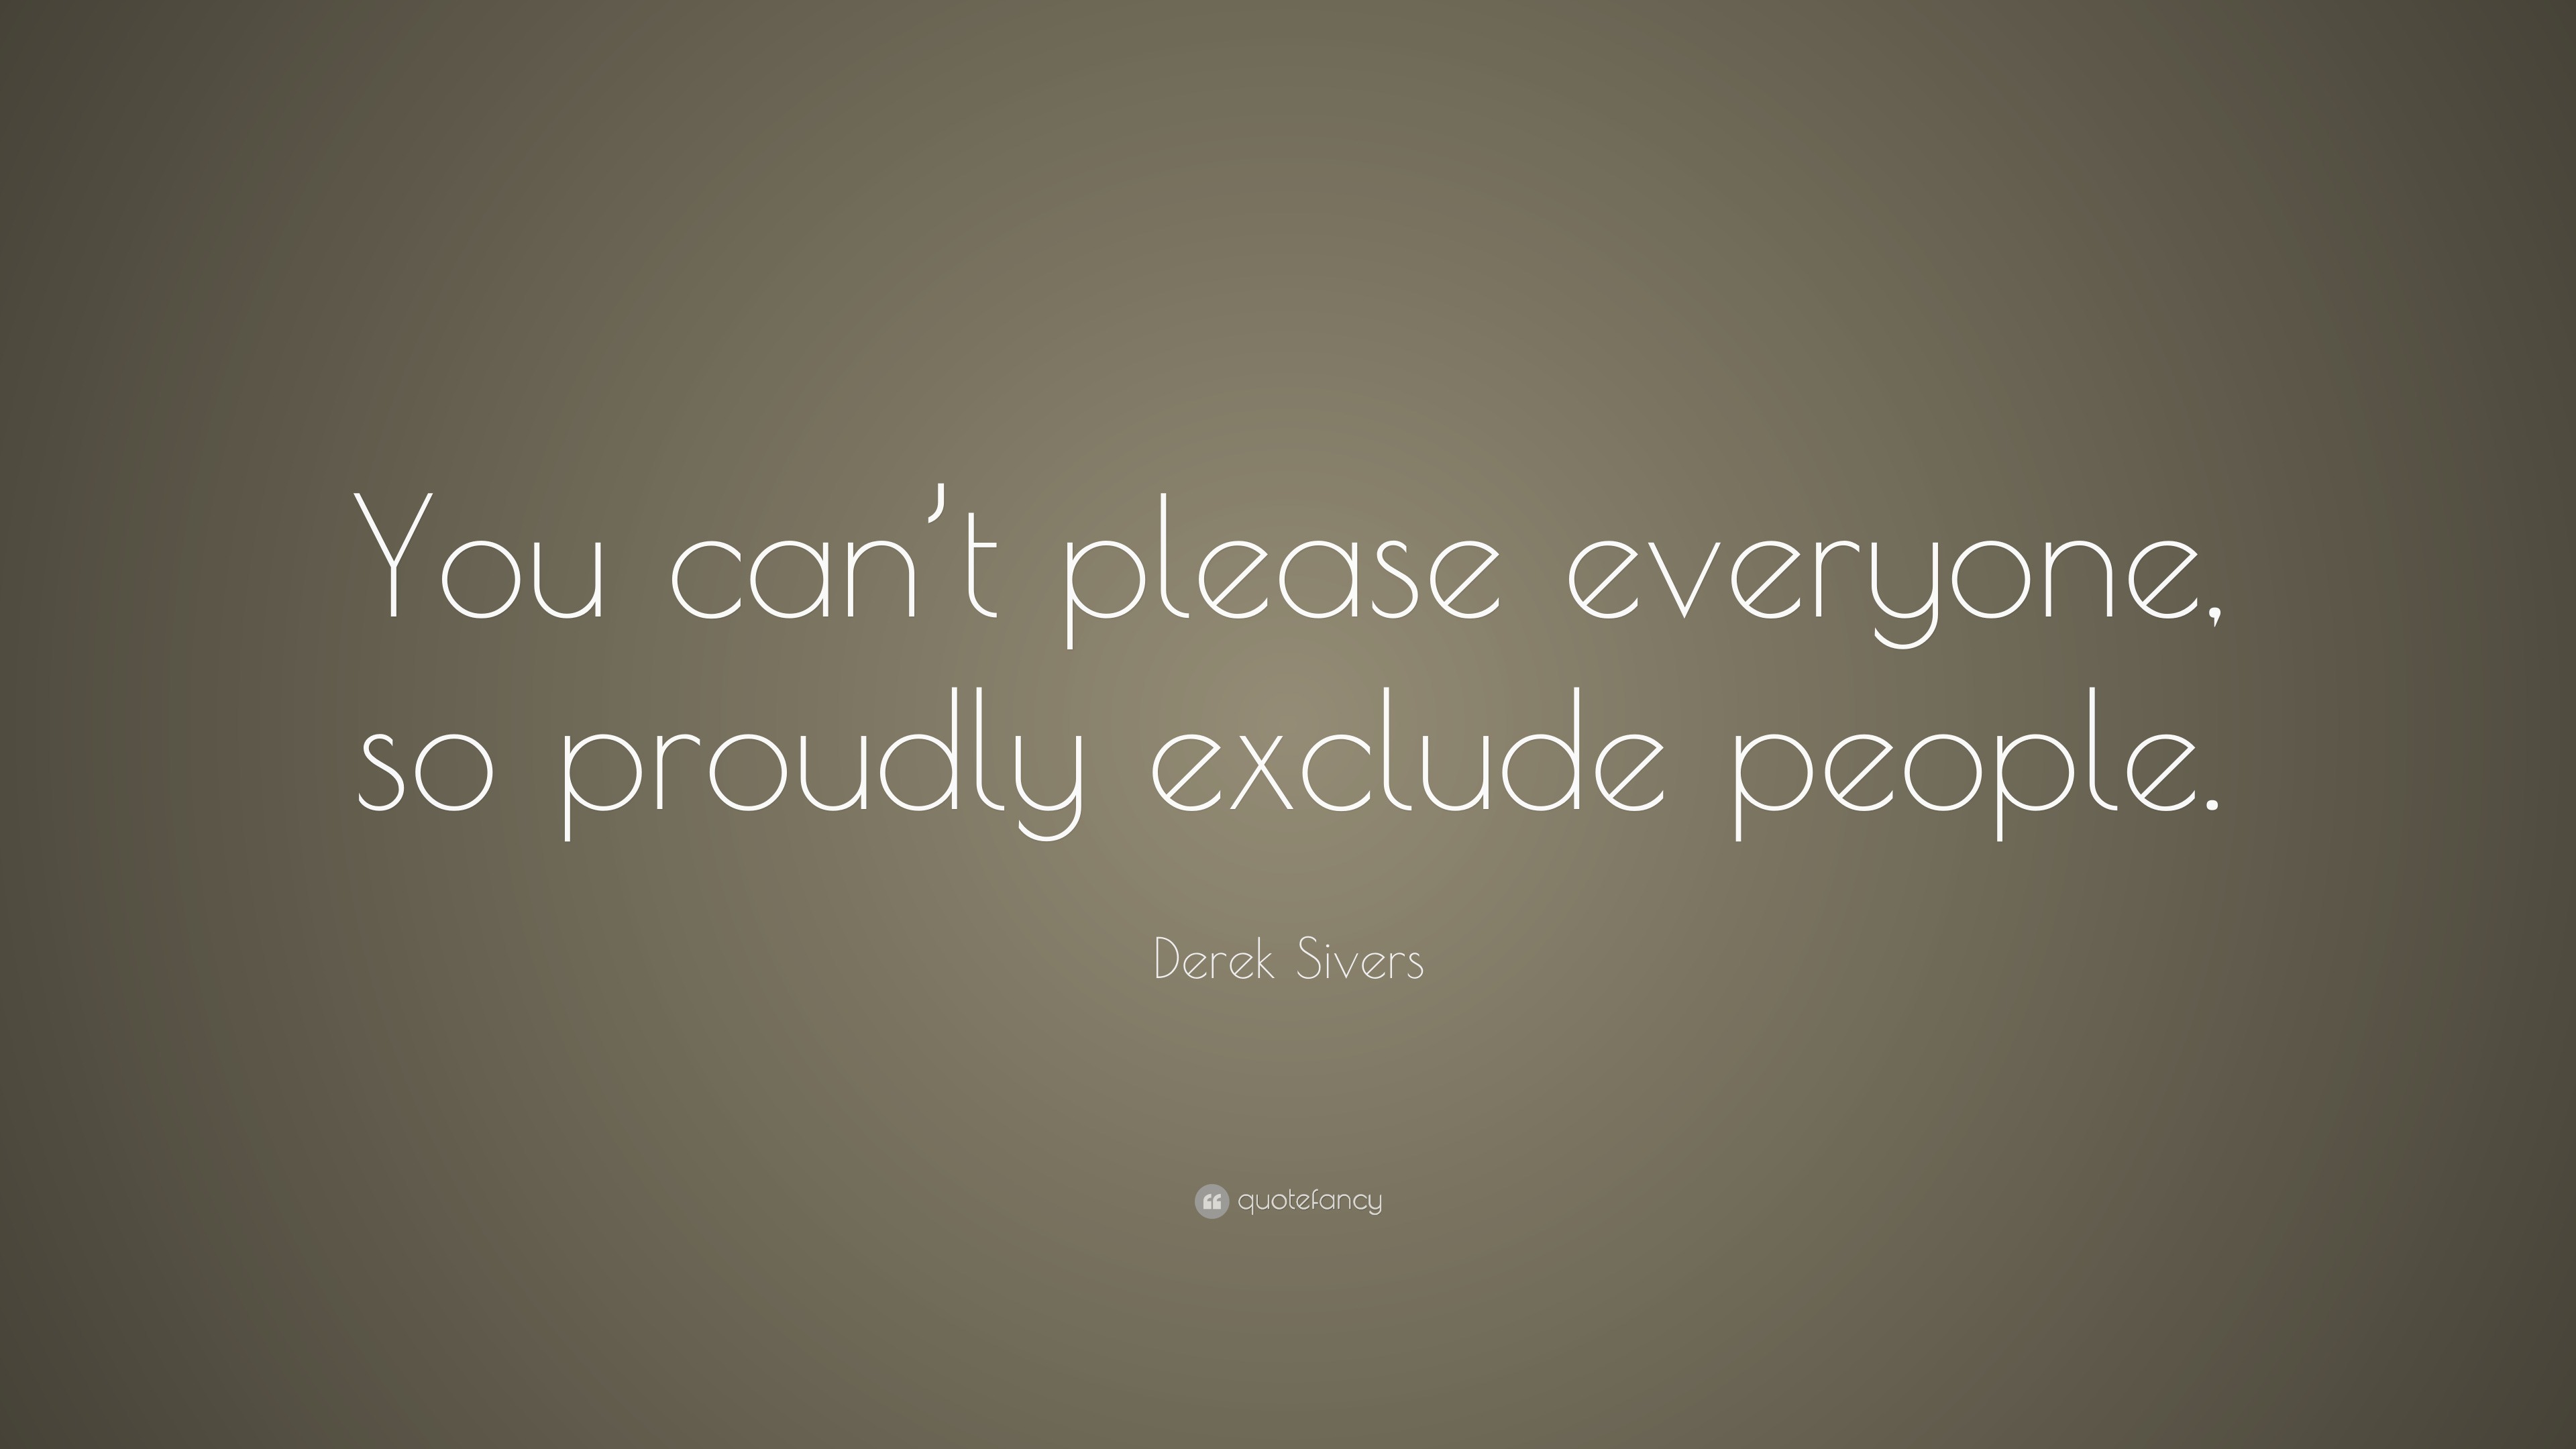 Derek Sivers Quote: “You can't please everyone, so proudly exclude people.”